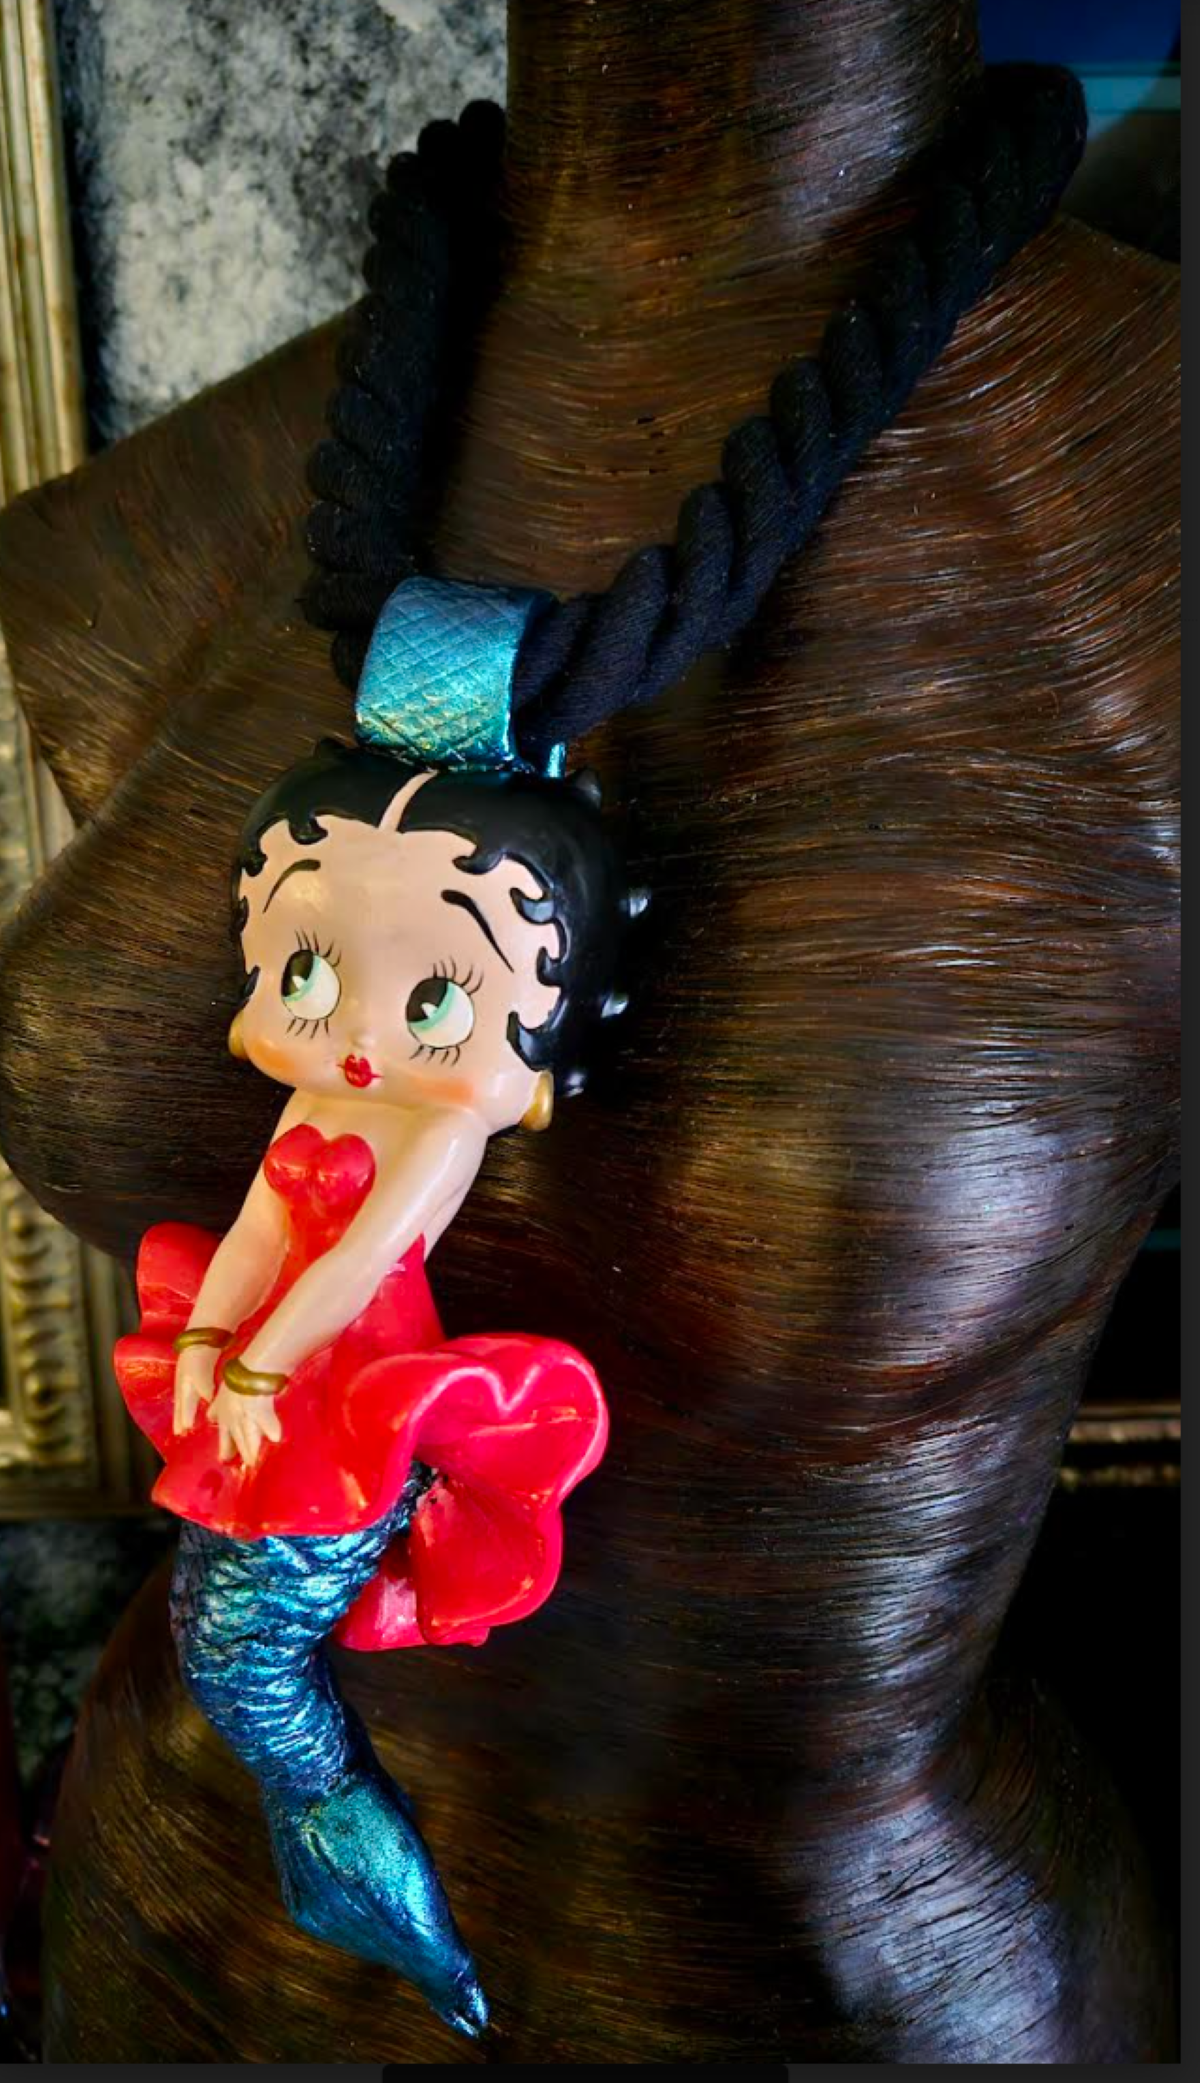 Betty Boop Sculpted Mermaid Statement Pendant -   Whimsical Femme Fatale Cartoon Character With Black Rope - Lagenlook Talisman - Kat Kouture Jewelry